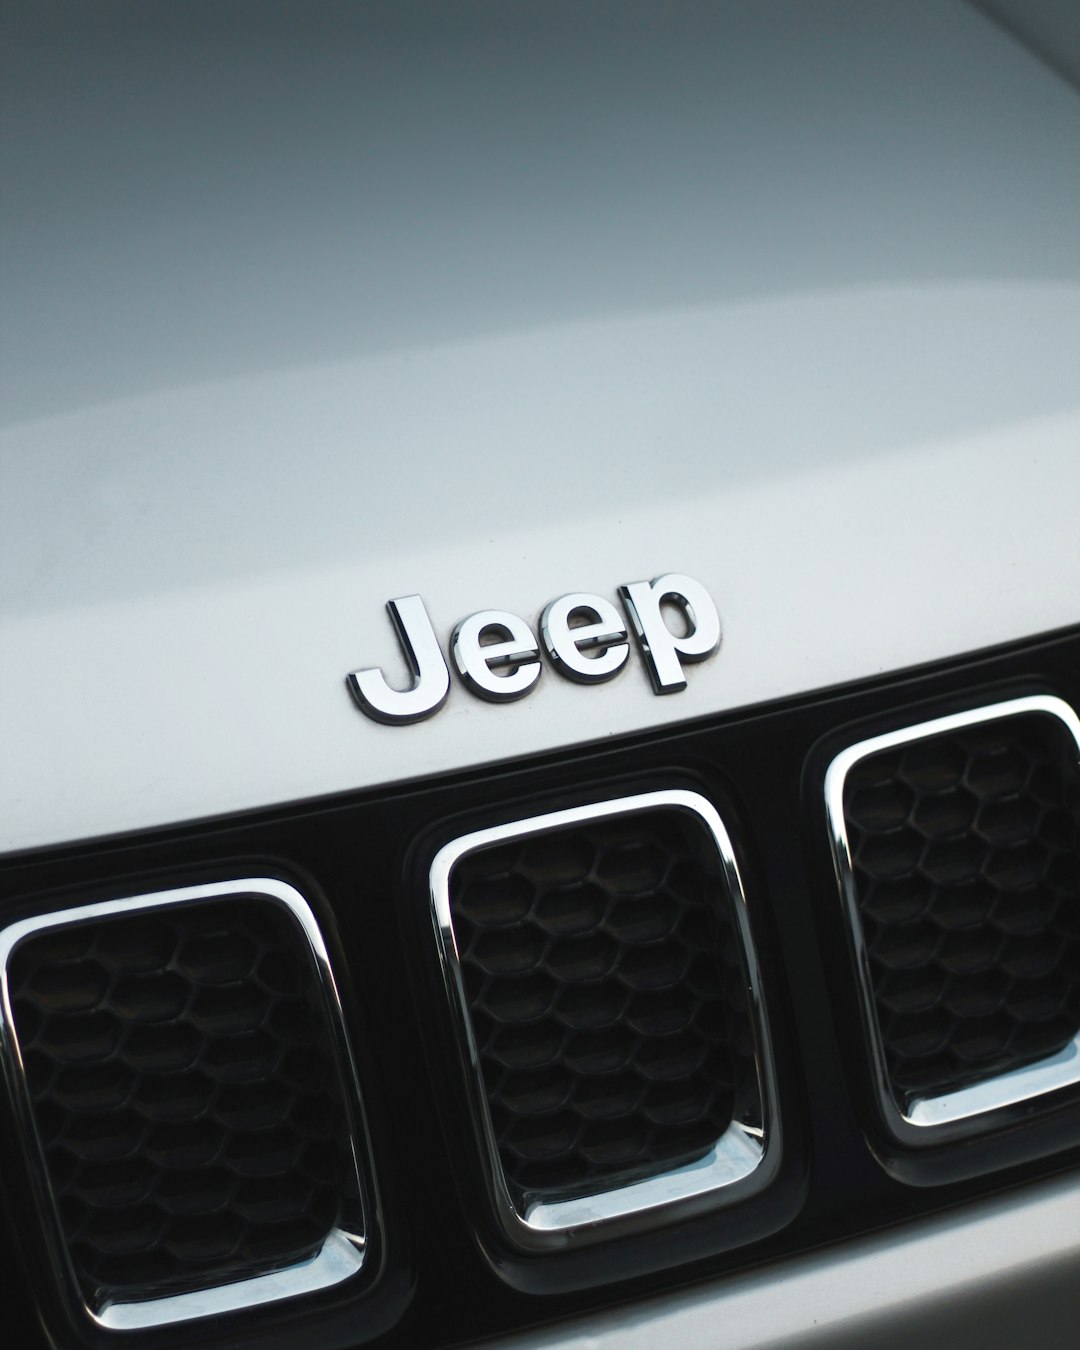 The Jeep Grand Wagoneer is a luxurious full-size SUV known for its iconic design and off-road capabilities.